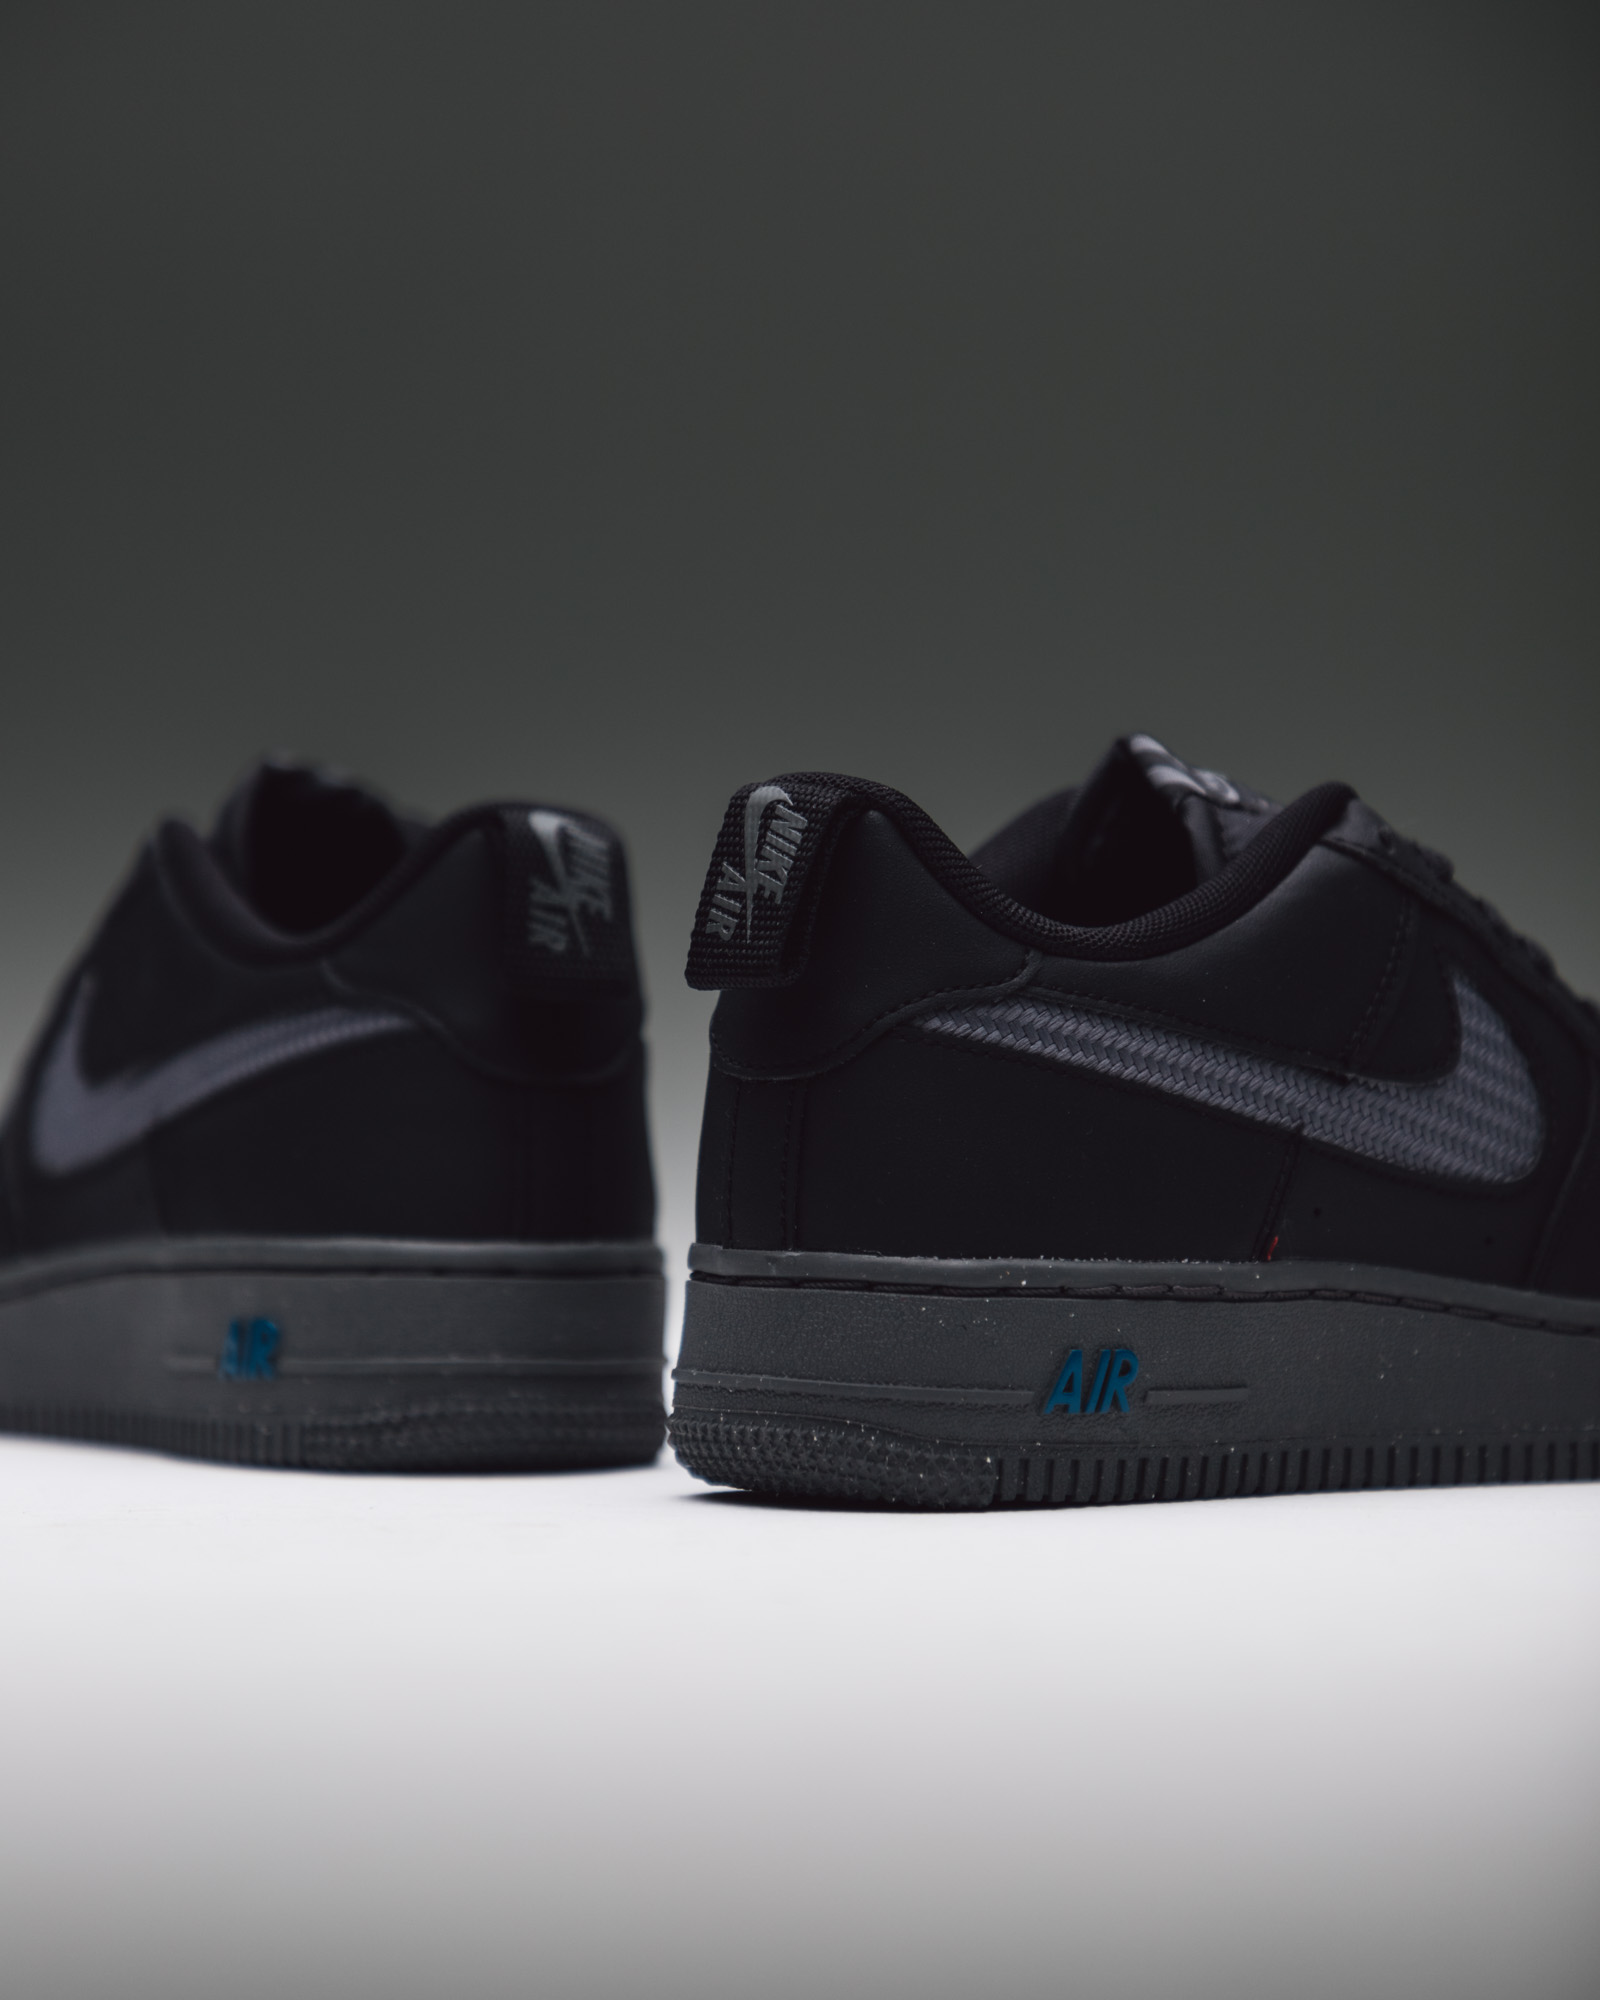 JD Sports Canada on Twitter: "Let your kiddo the style lead this iconic AF1 silhouette with fresh and sleek design ✔️ Shop the Nike Air Force 1 JSP GS now